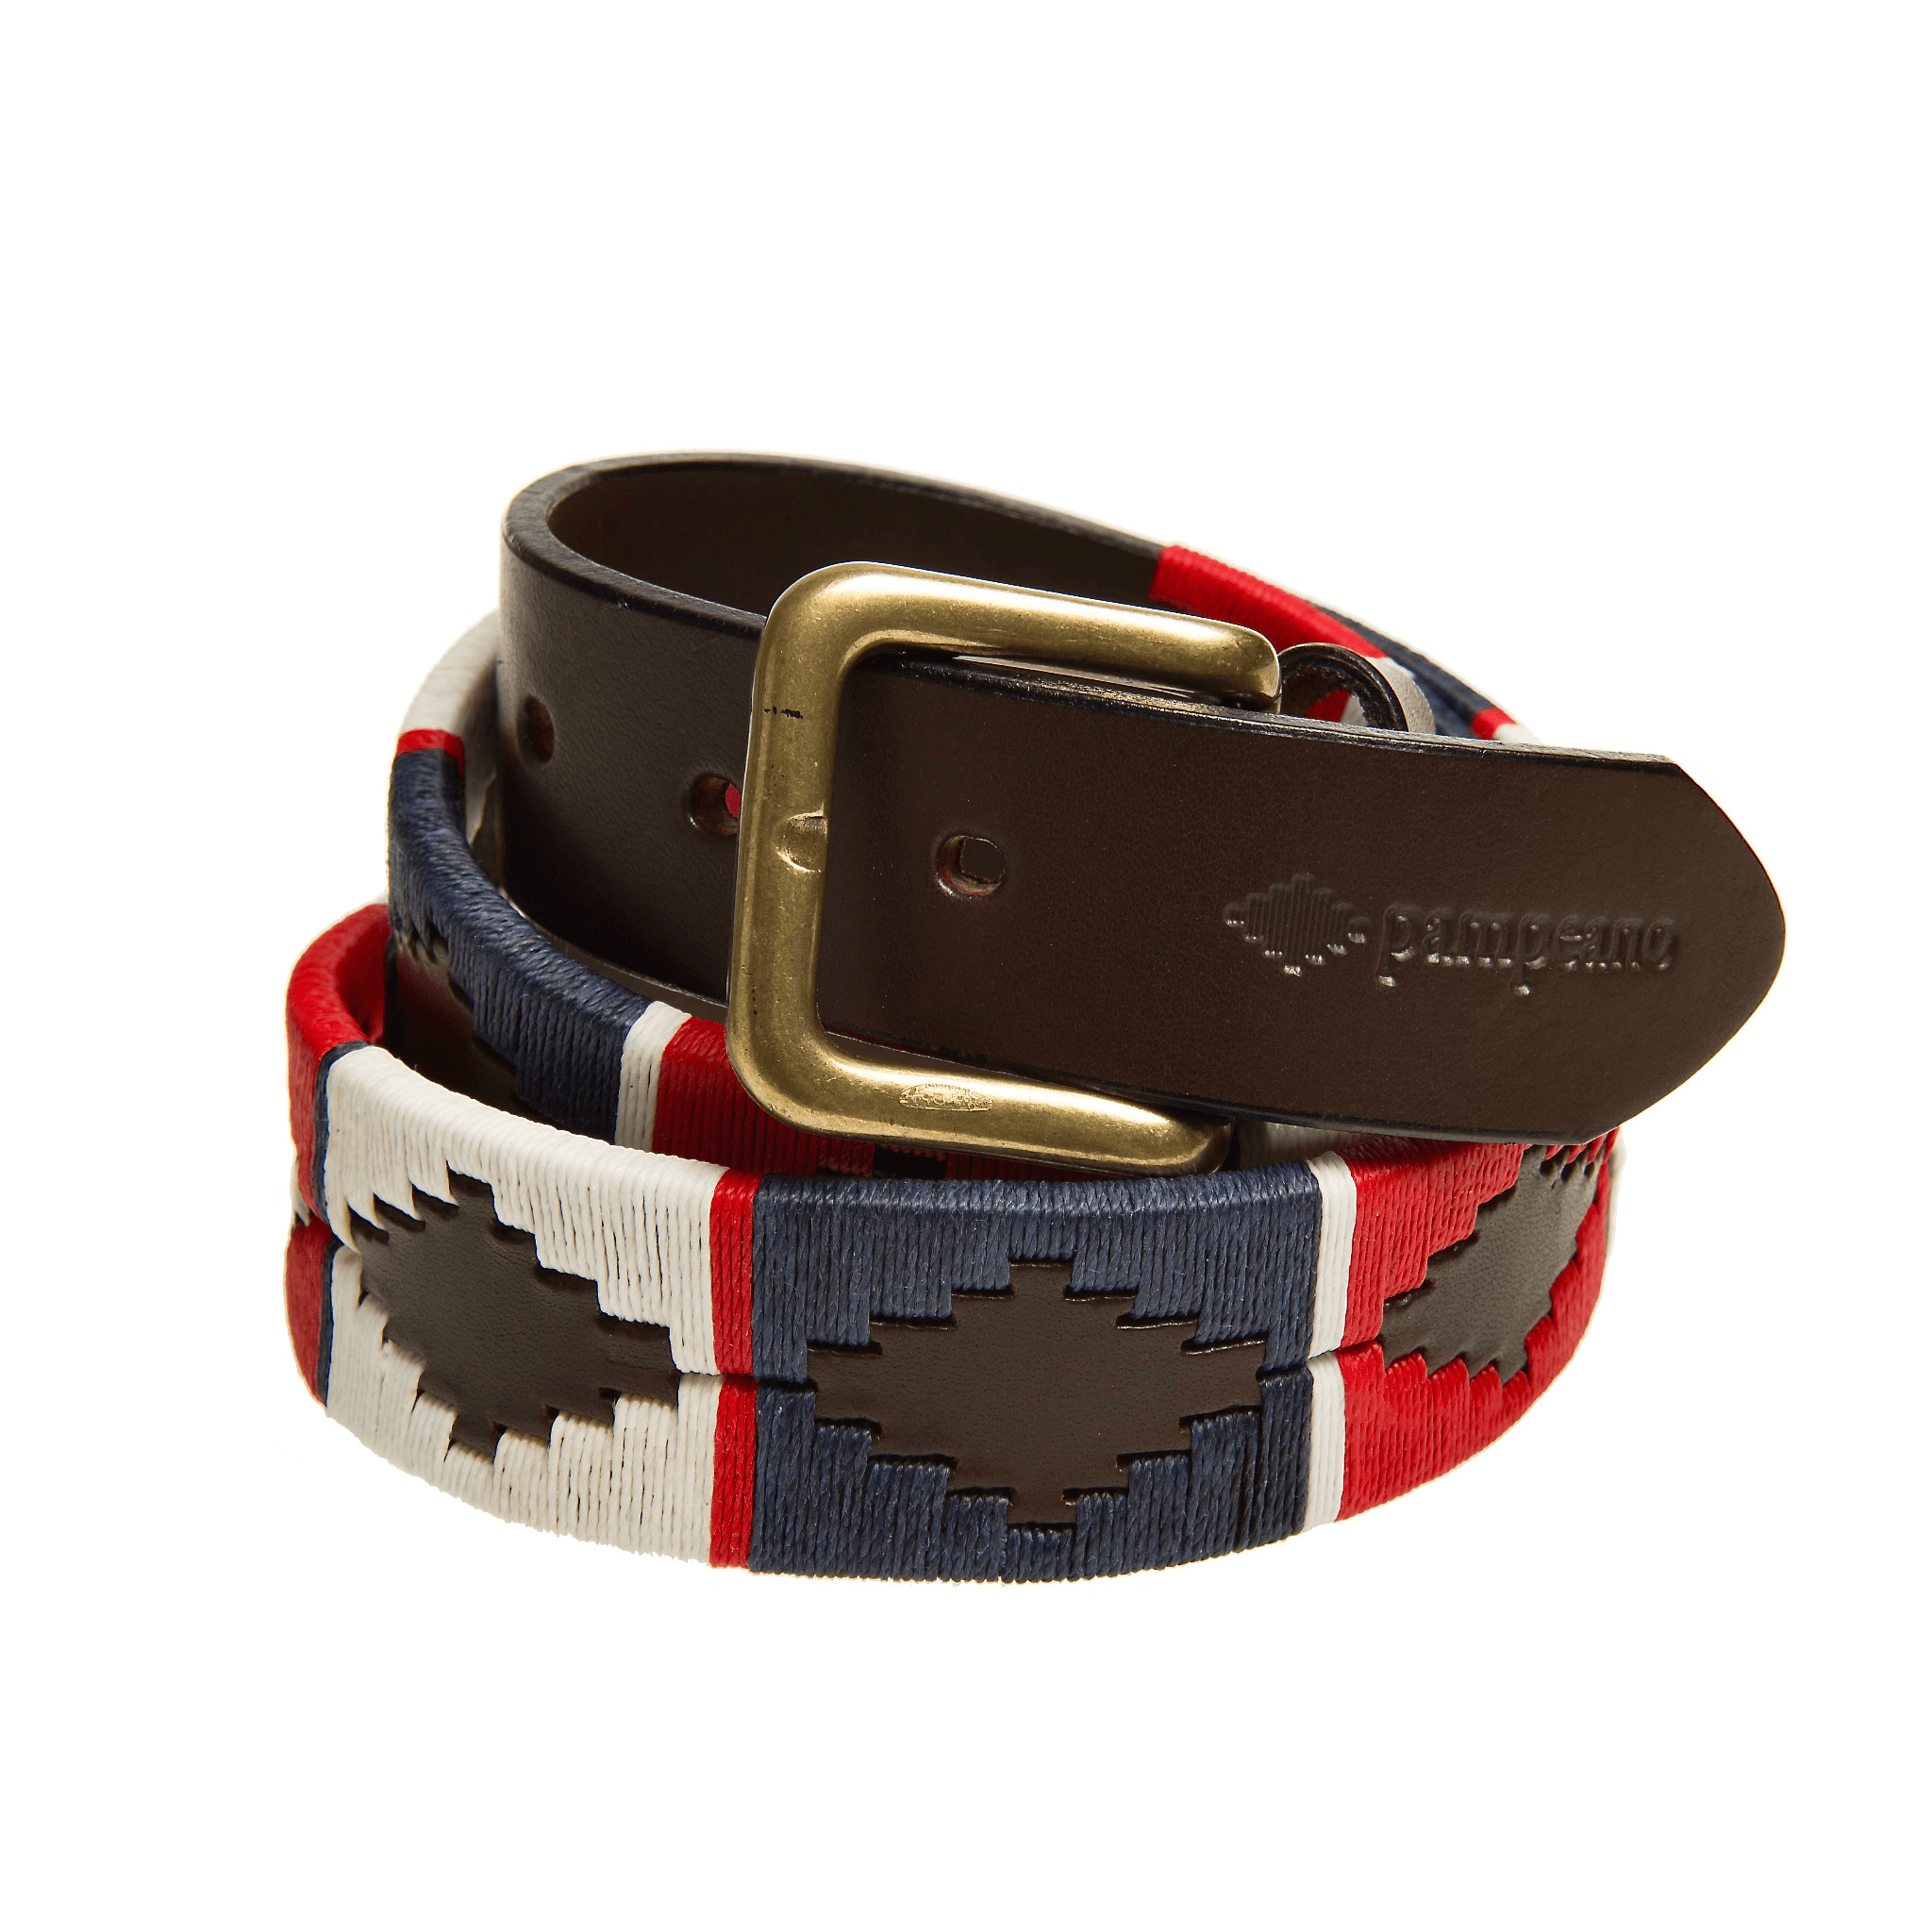 The Country Direct Royal Navy Leather Polo Belt, made in partnership with Pampeano, featuring red, navy-blue, and white wax thread detailing.